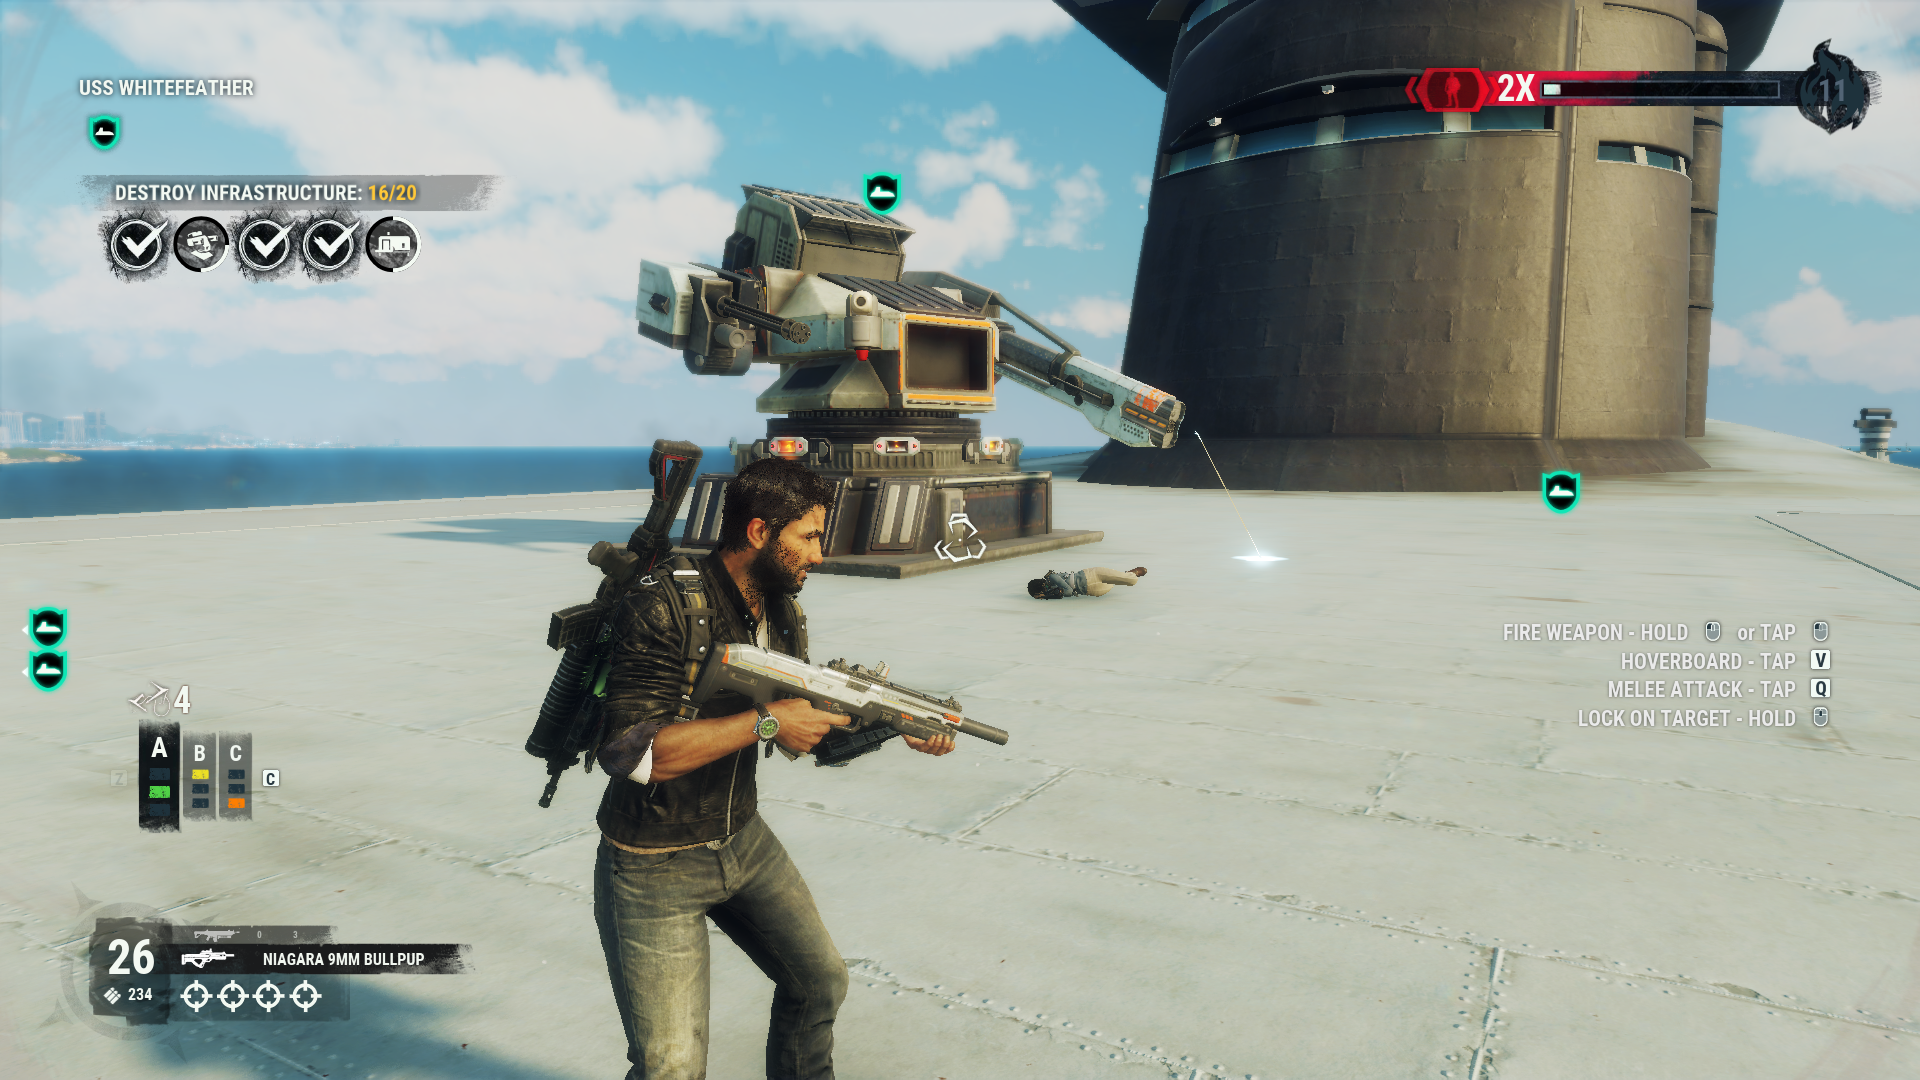 how do i hop in a vehicle turrent in just cause 3 for pc